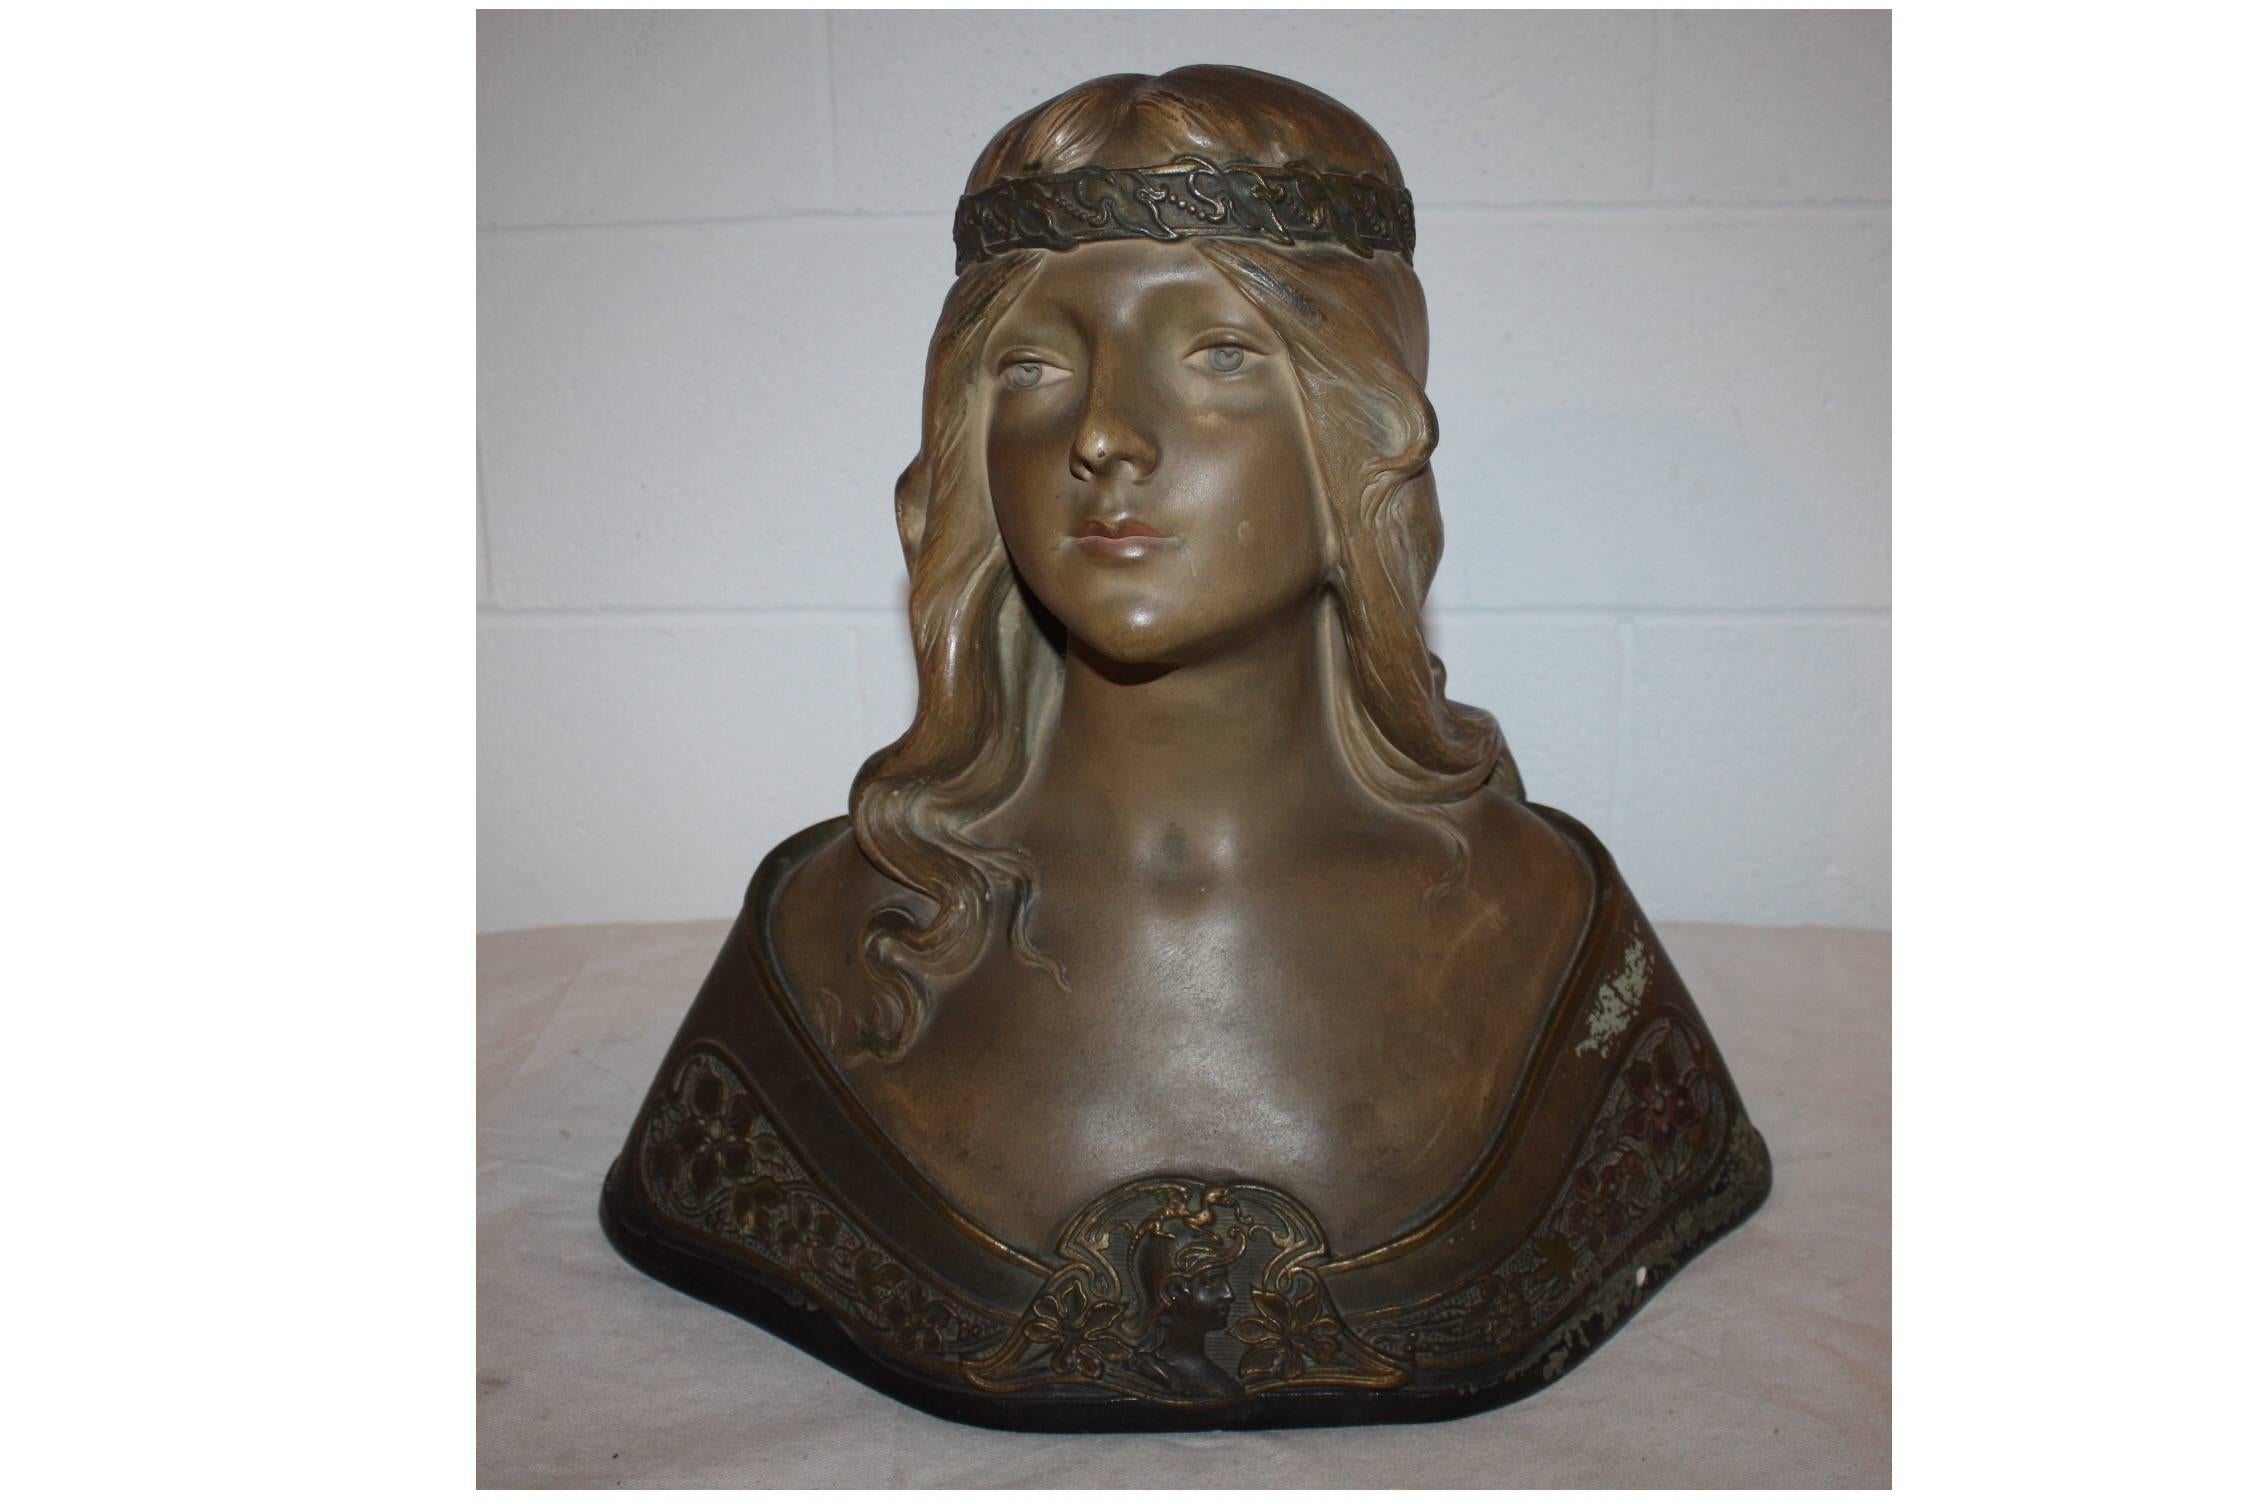 Magnificent 19th century French bust, signed and dated.